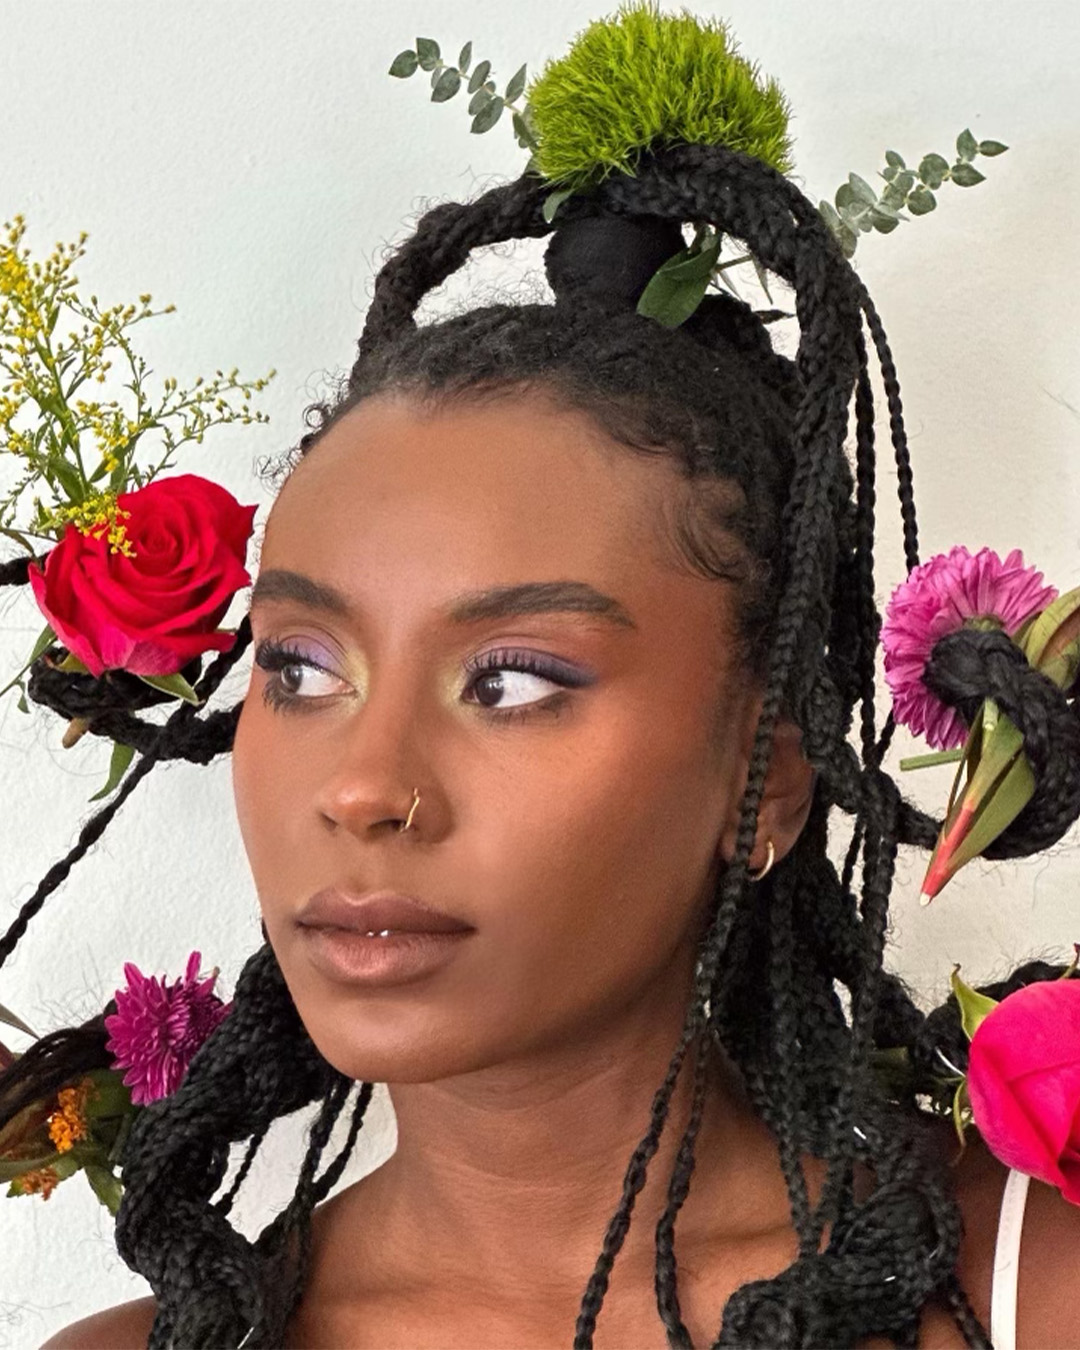 Cierra Wright with flowers in her hair